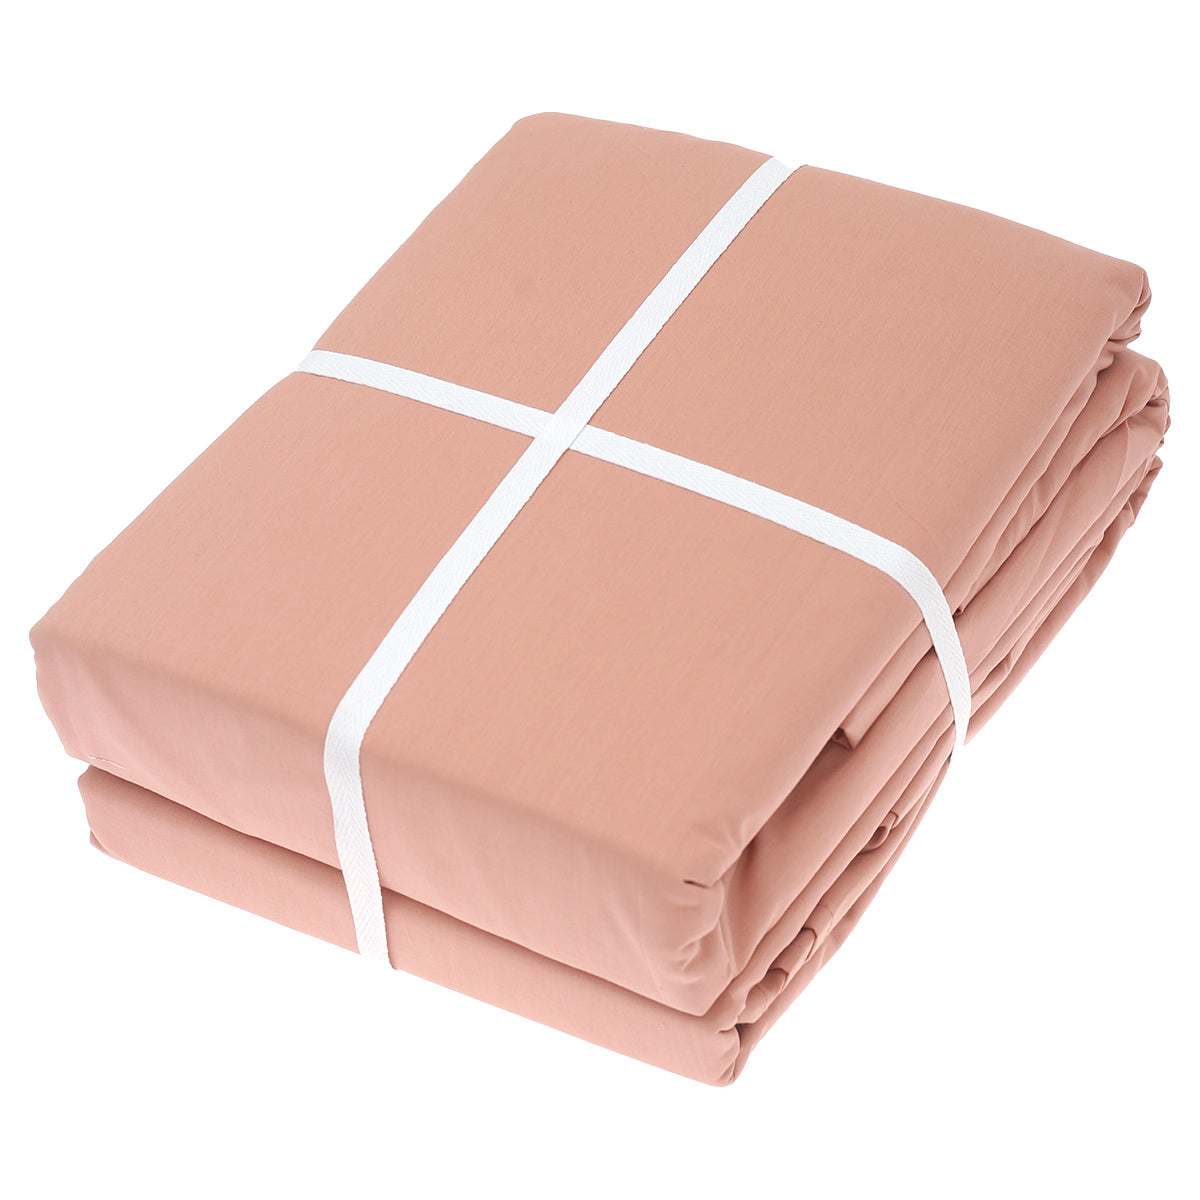 Peach Dyed Double Bedding Set of 6